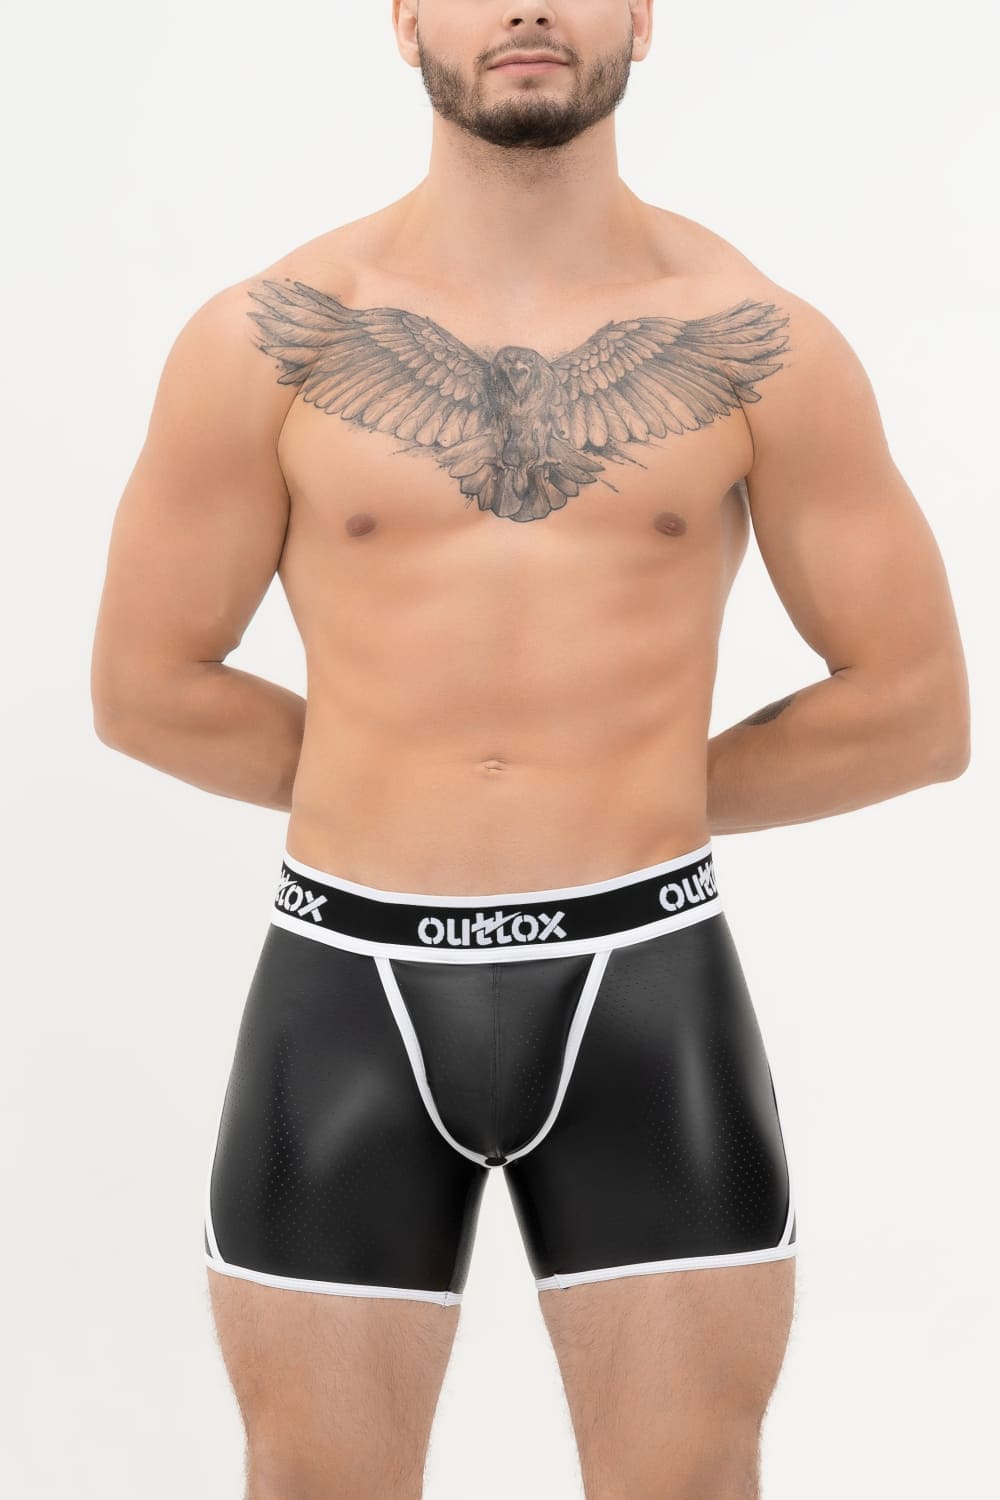 Outtox. Wrap-Rear Short Tights. Snap Codpiece. Black+White